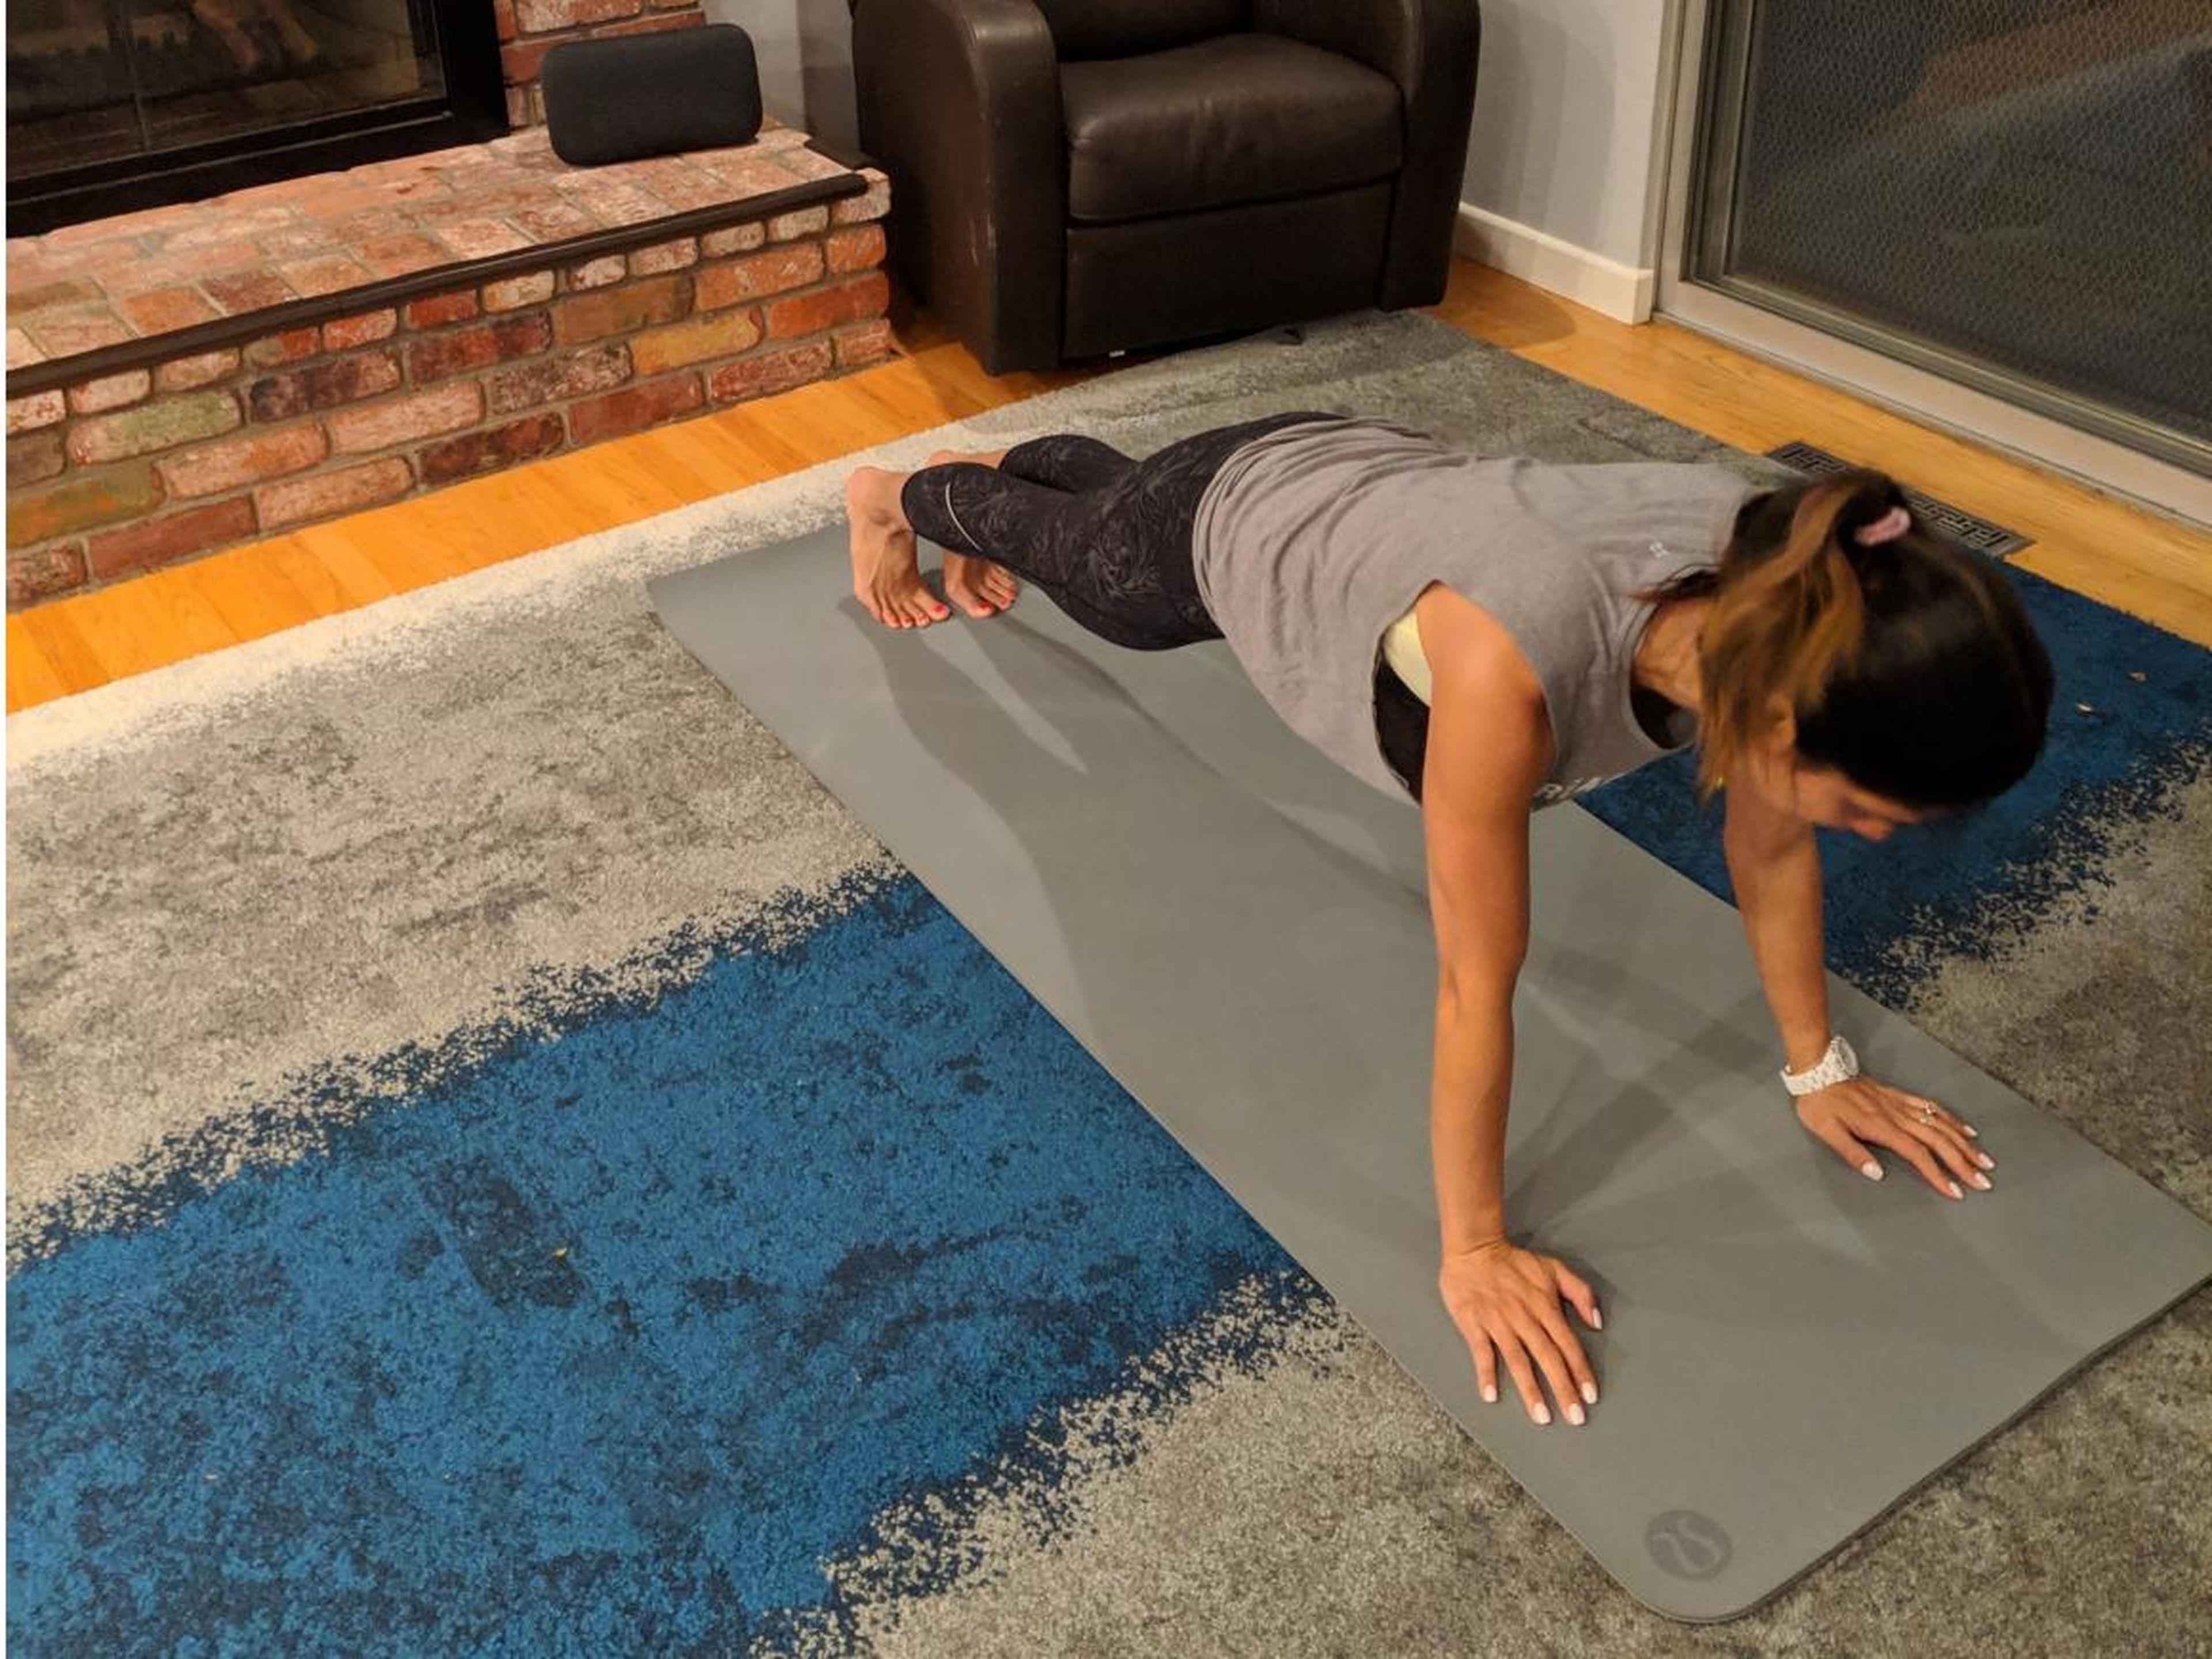 Rincon wakes up at about 5:30 a.m. so she has time to do a quick workout — which includes core work and yoga — and take a shower before her kids wake up at about 6:15.